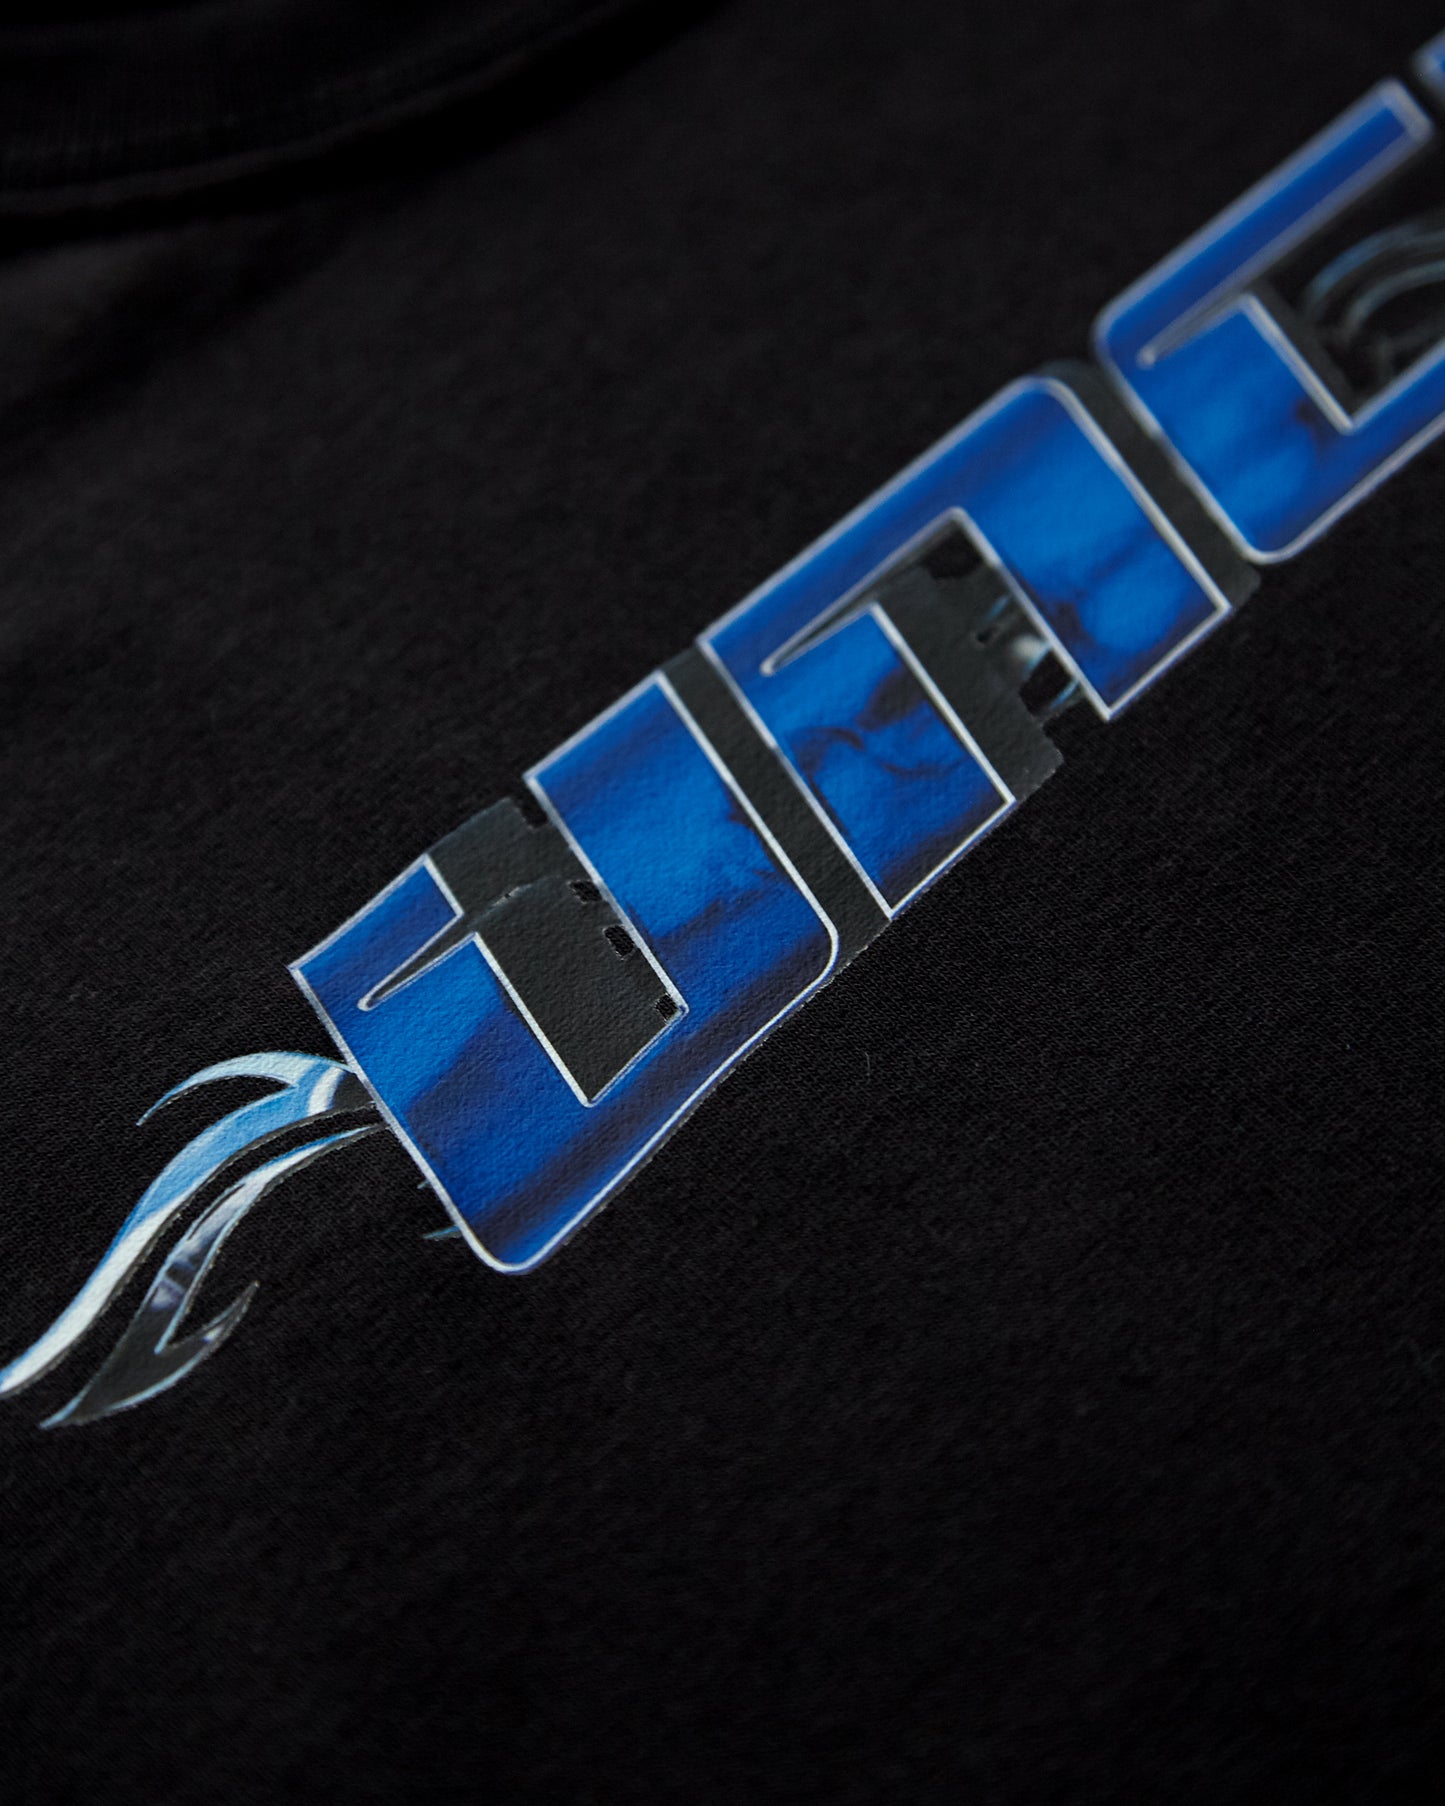 Chrome Y2K: UNCUT, blue and silver on black - tee.